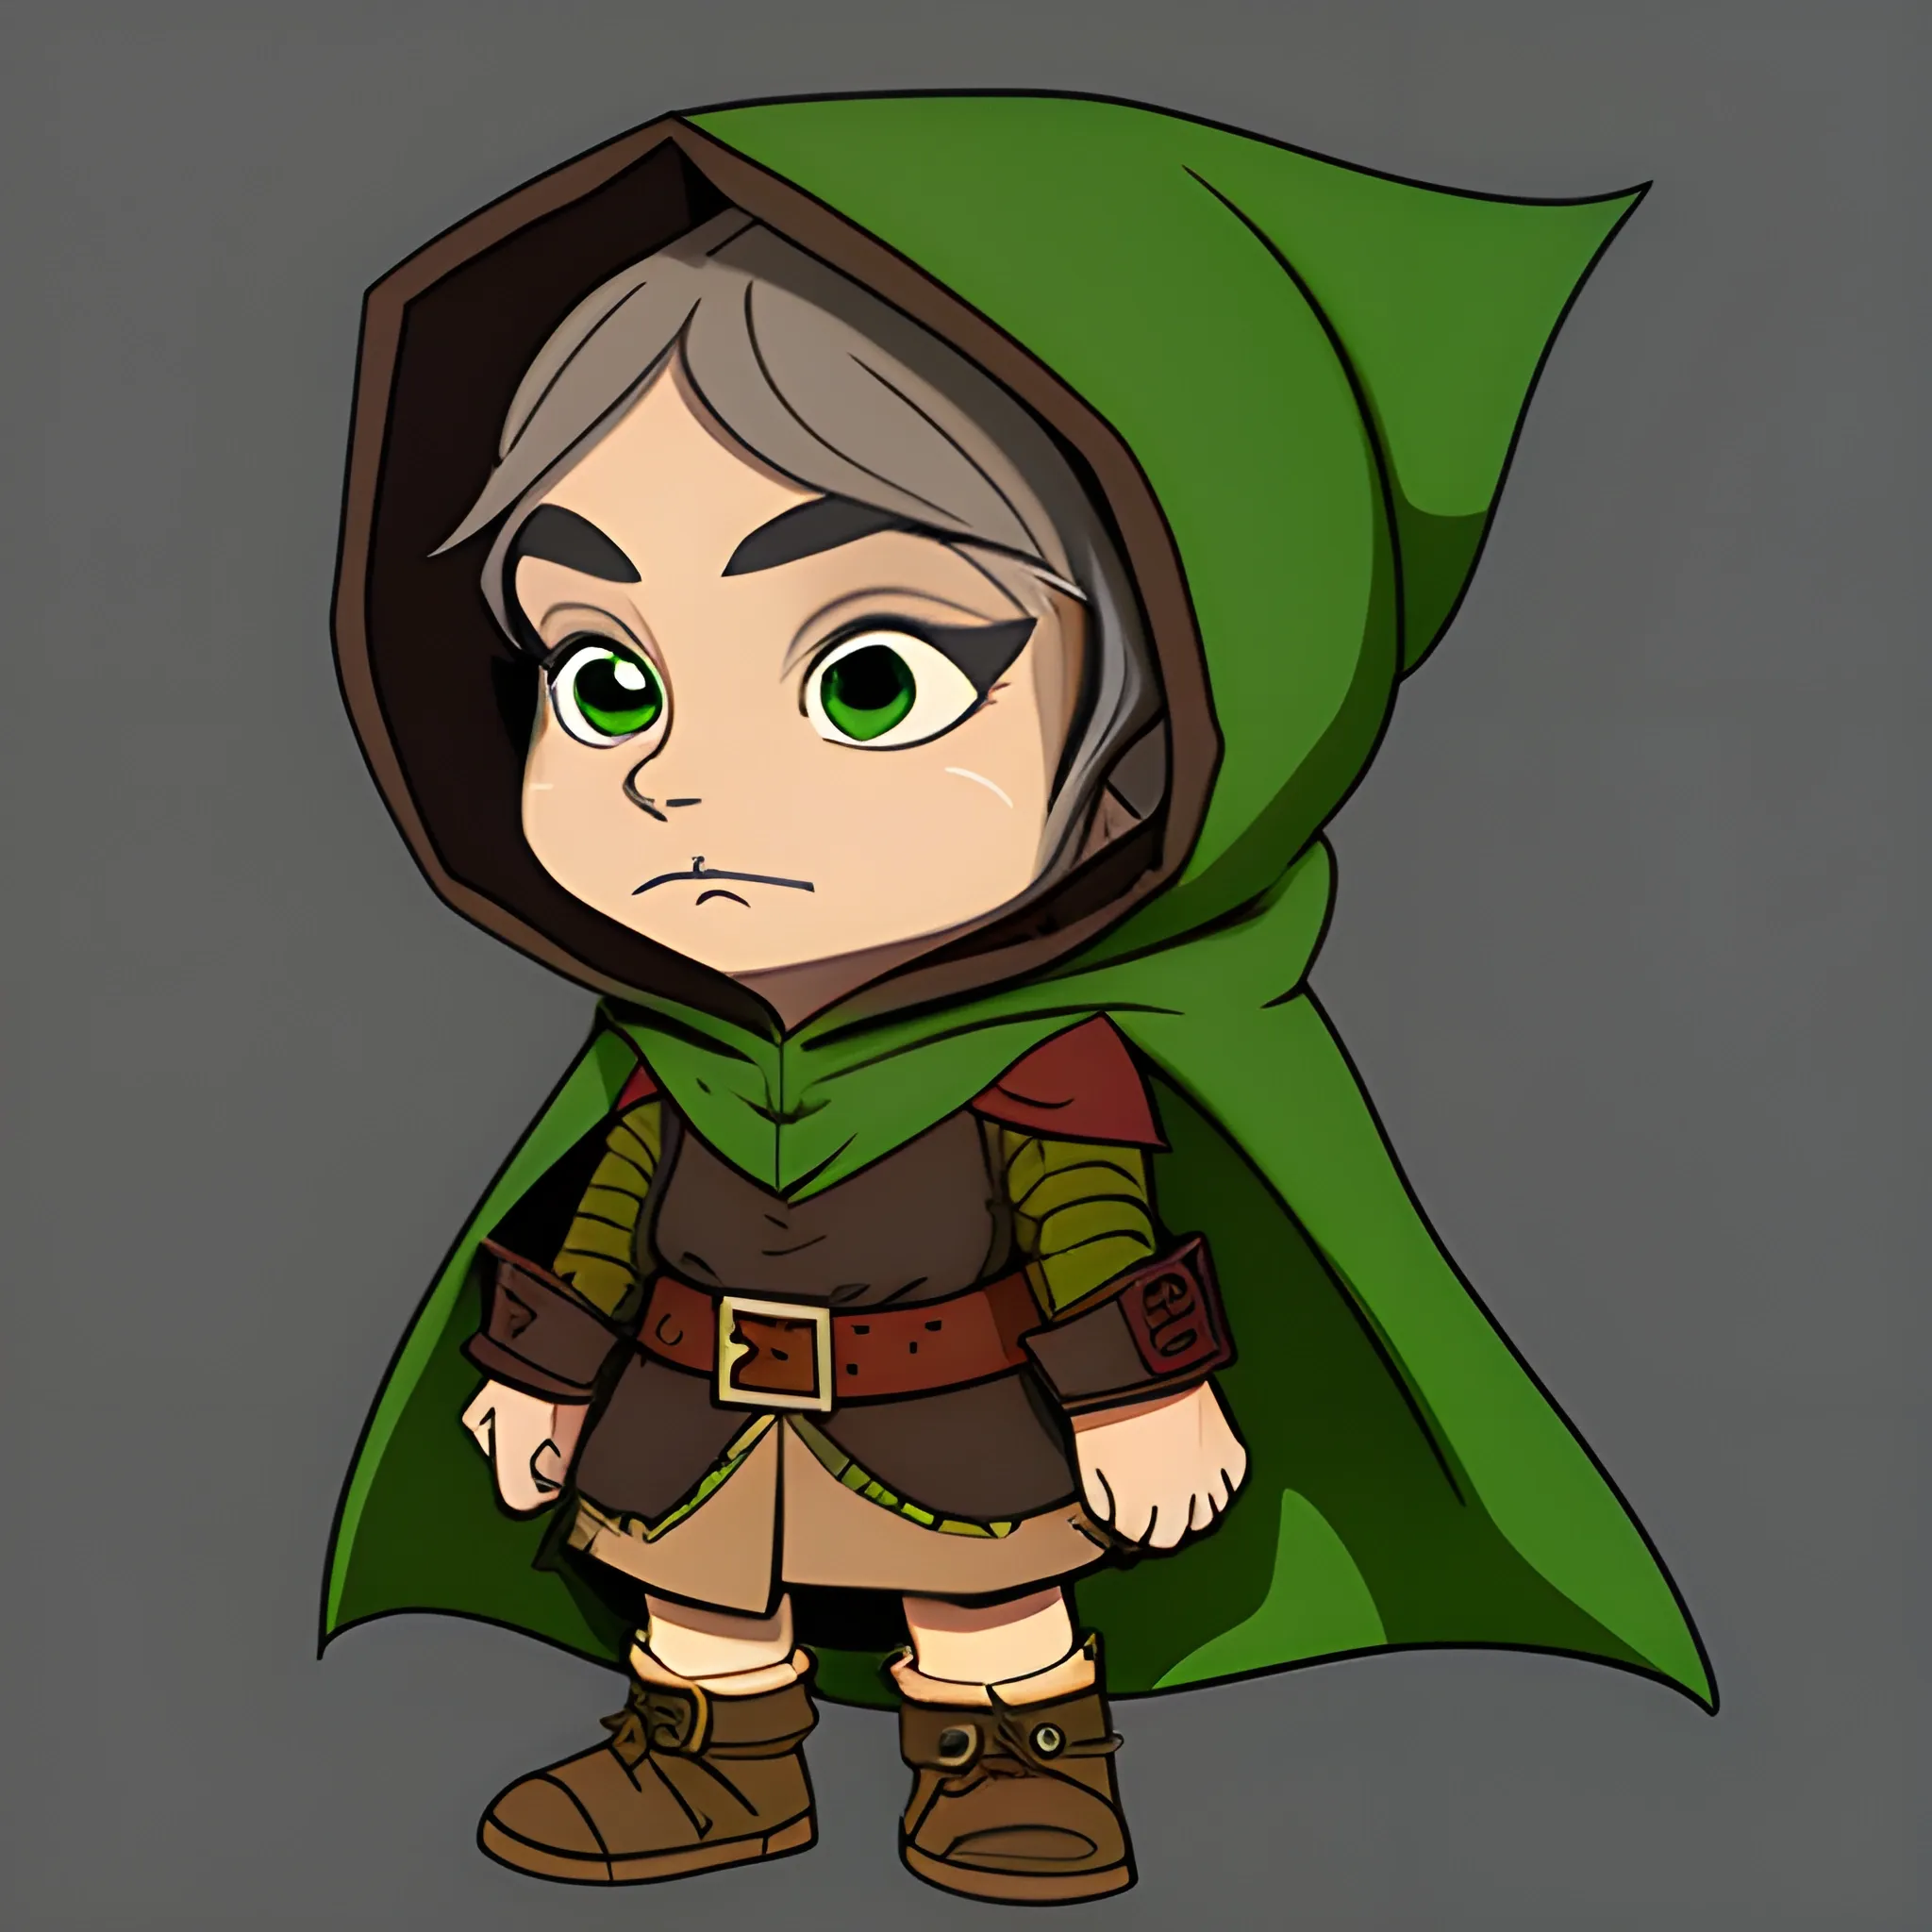 dungeons and dragons, gnome, rogue, green eyes, brown hair, tan skin, hooded cloak, short, black outfit, green trim, Cartoon